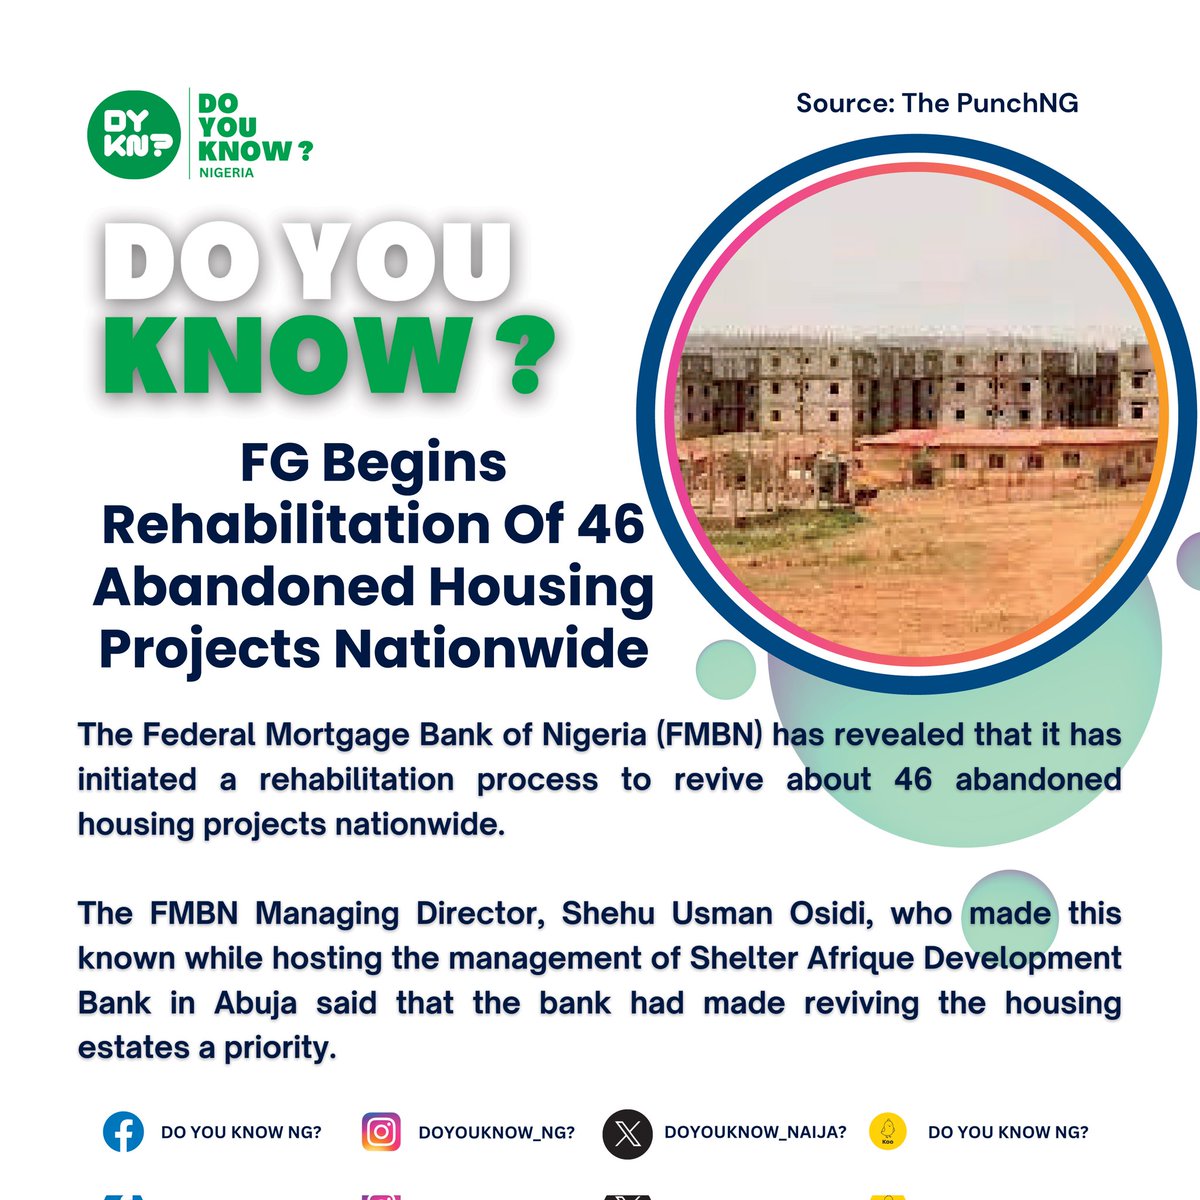 THE TINUBU ADMINISTRATION IS INJECTING NEW LIFE INTO ABANDONED HOUSING PROJECTS ACROSS NIGERIA!

#PositiveFactsNG